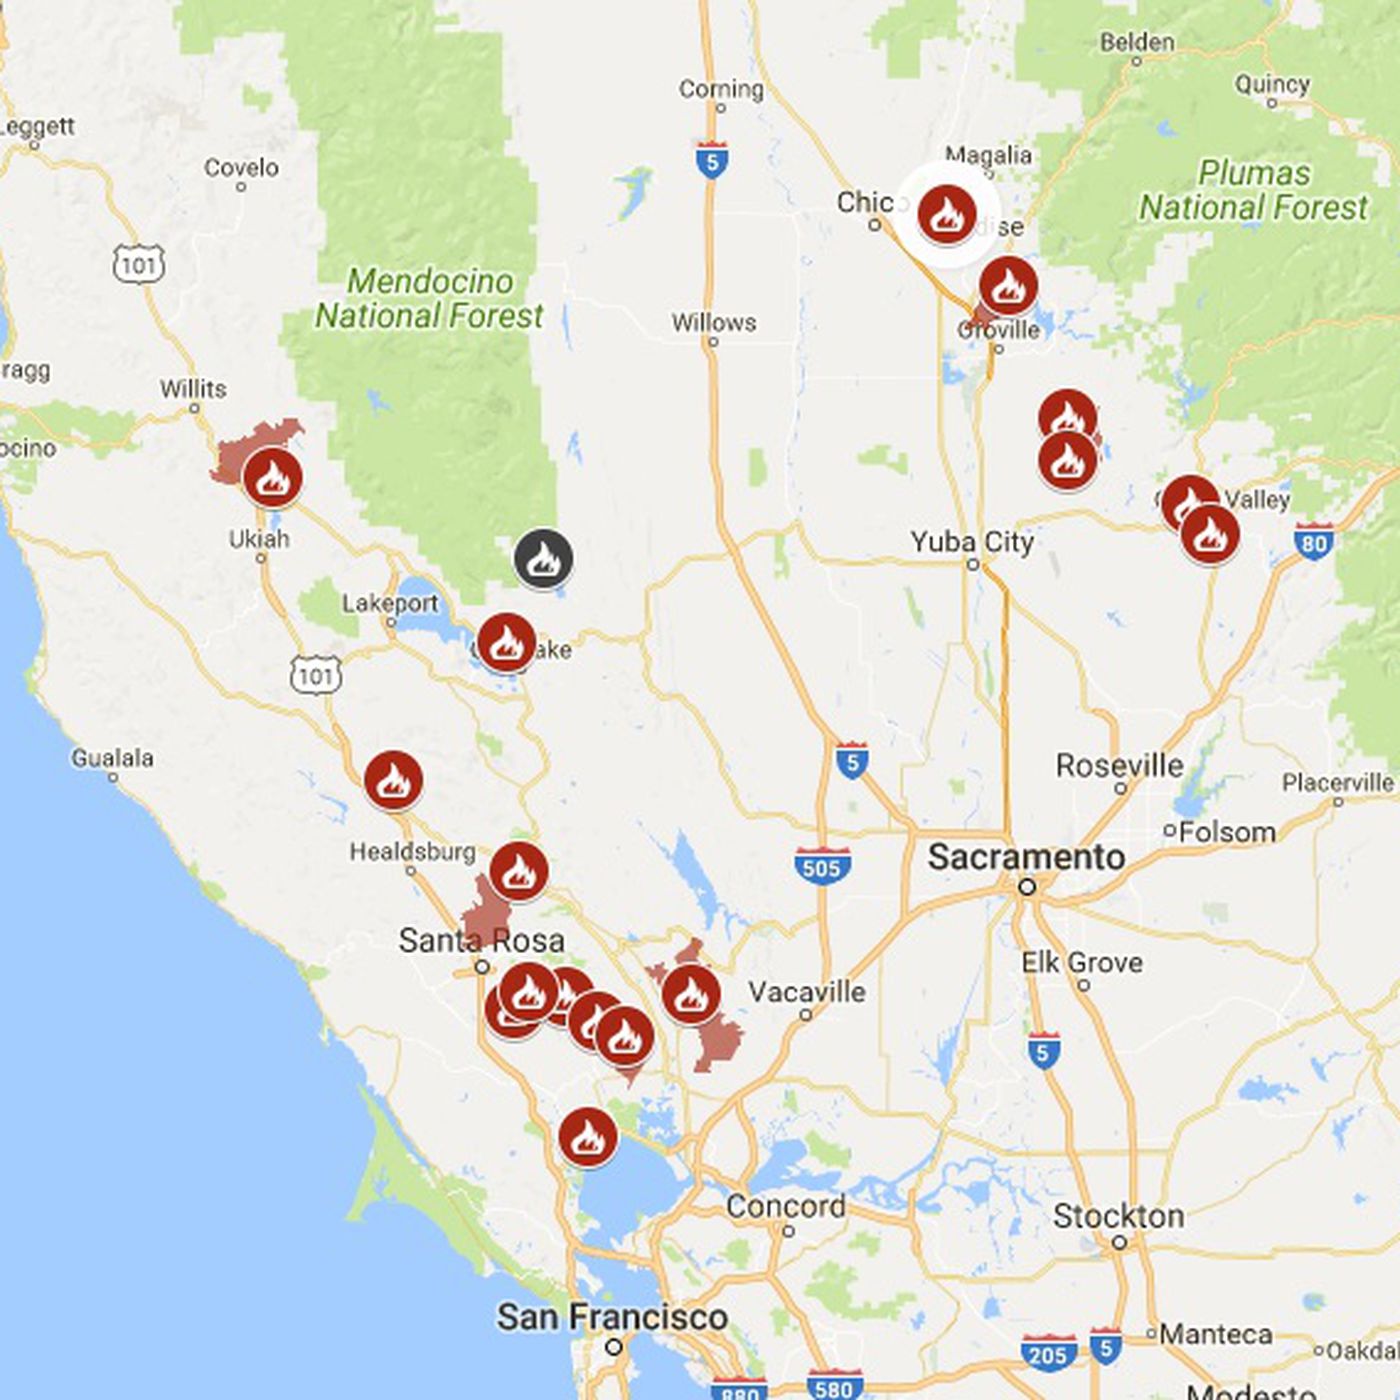 map of california north bay wildfires (update) - curbed sf